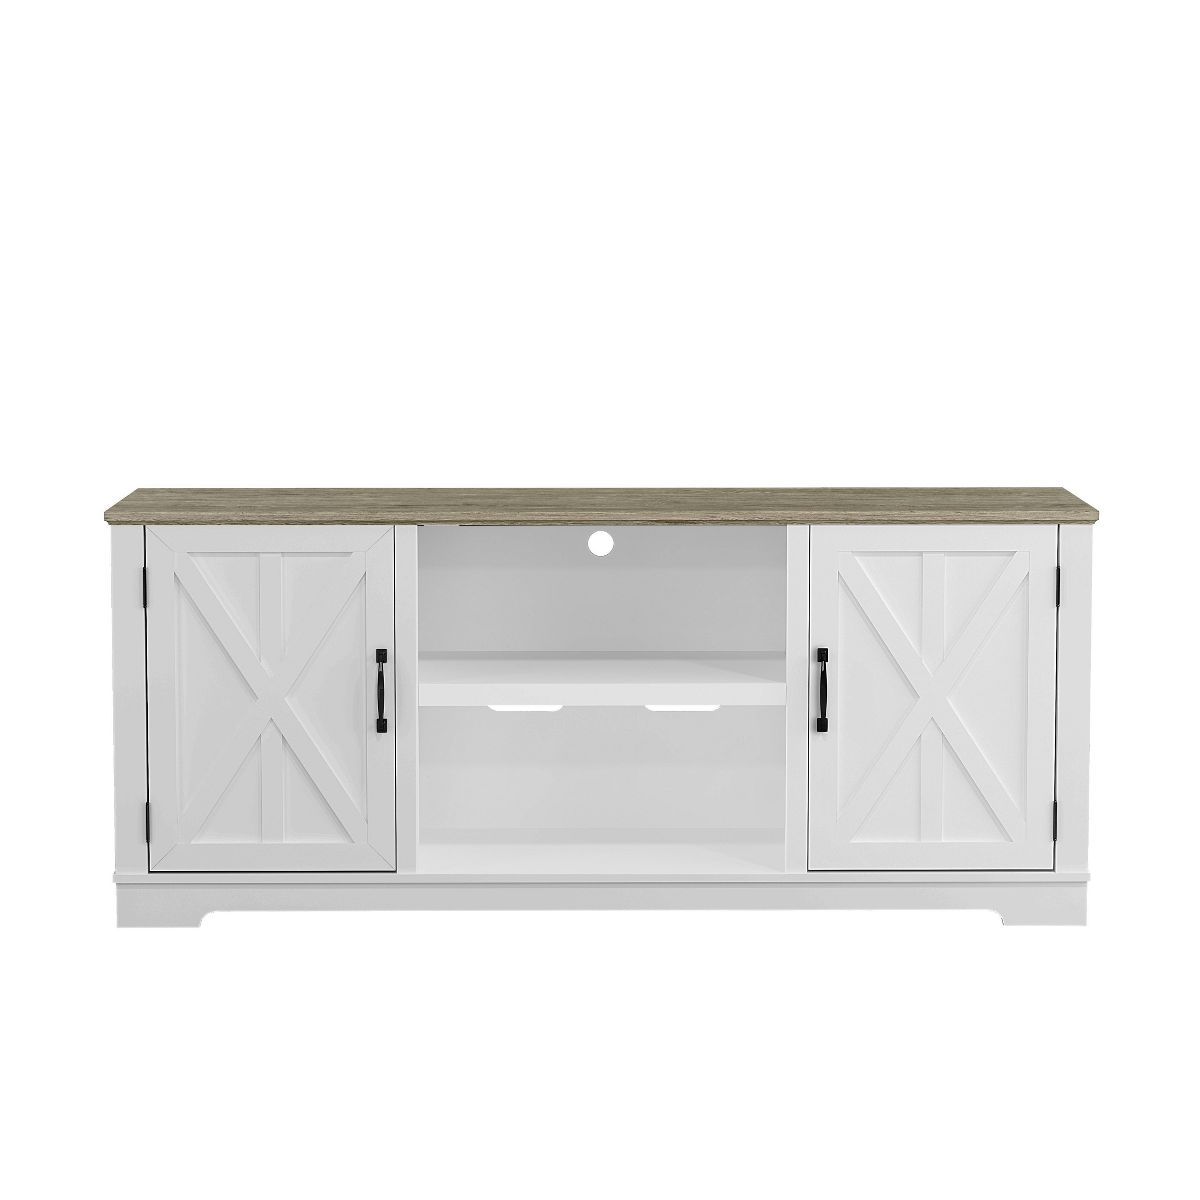 70" Classic Style TV Stand for TVs up to 78" - Festivo | Target